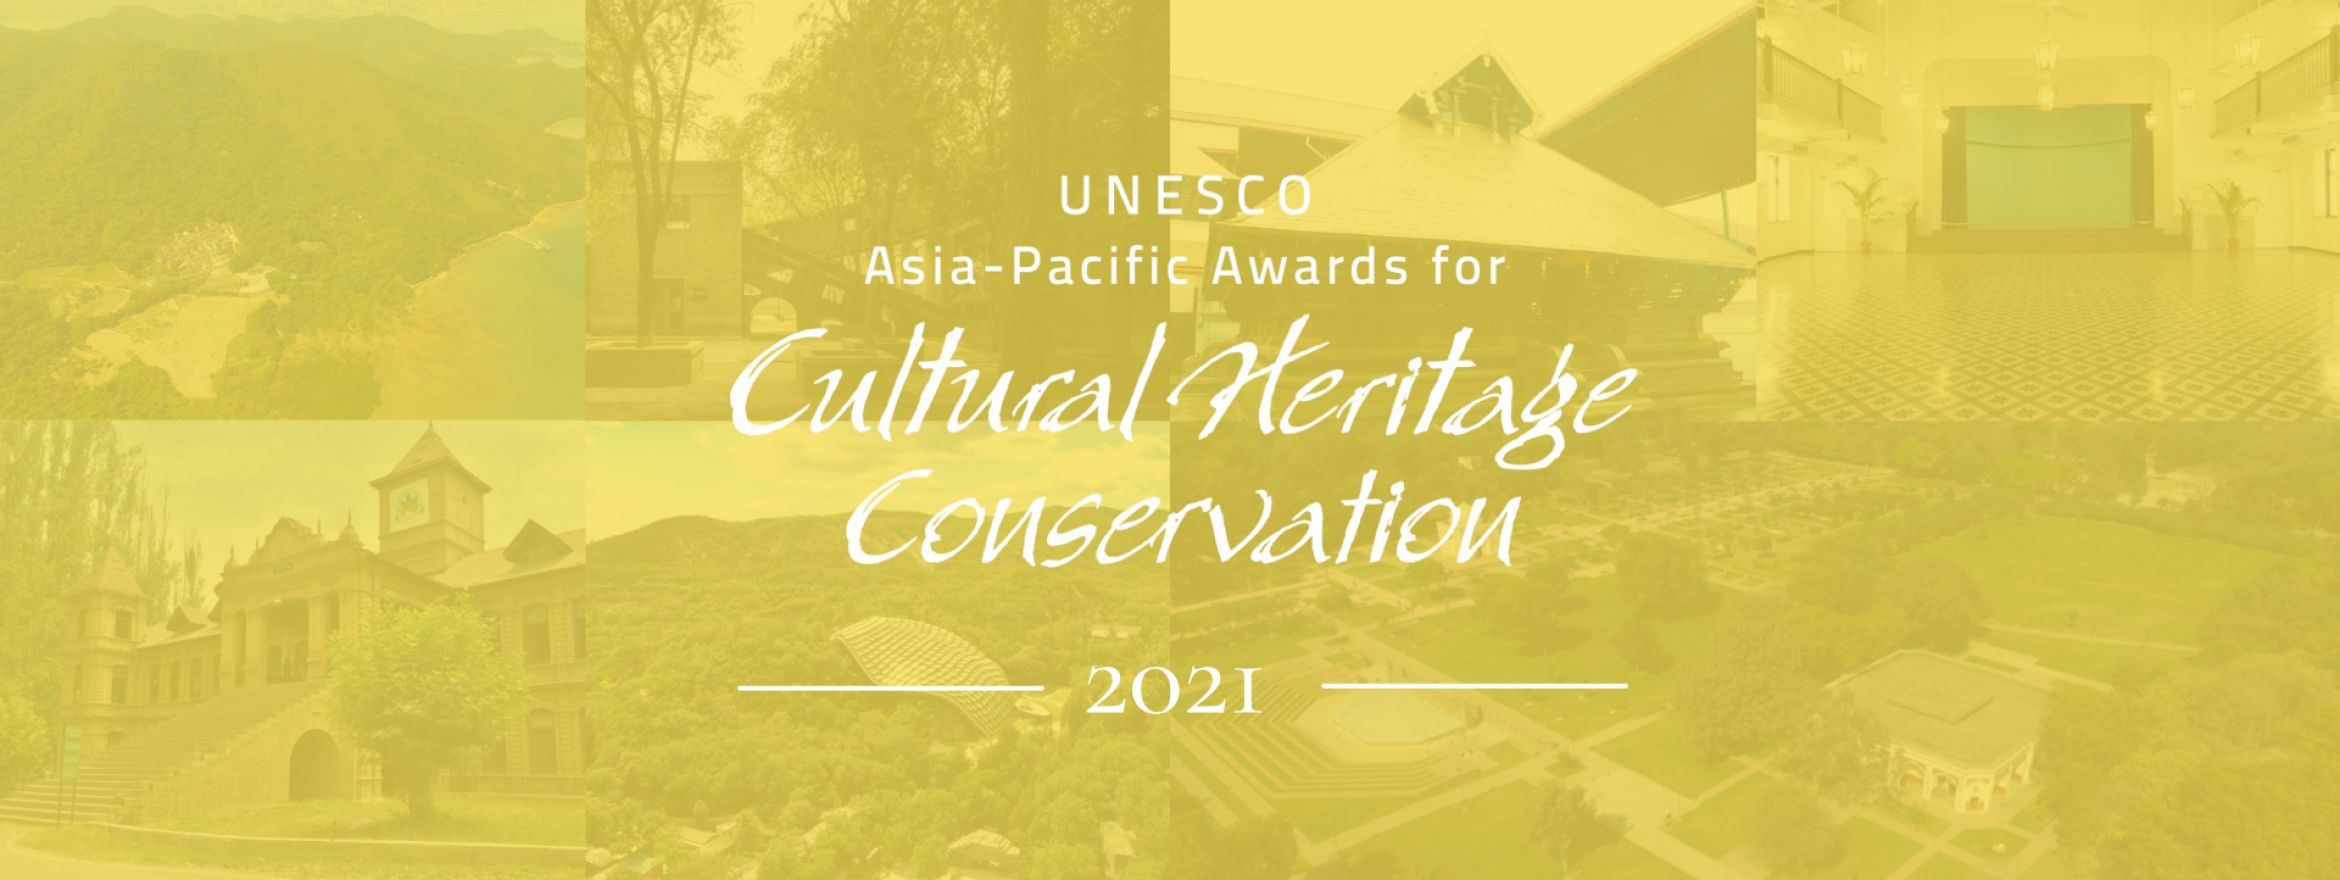 Call for Entries: 2021 UNESCO Asia-Pacific Awards for Cultural Heritage Conservation